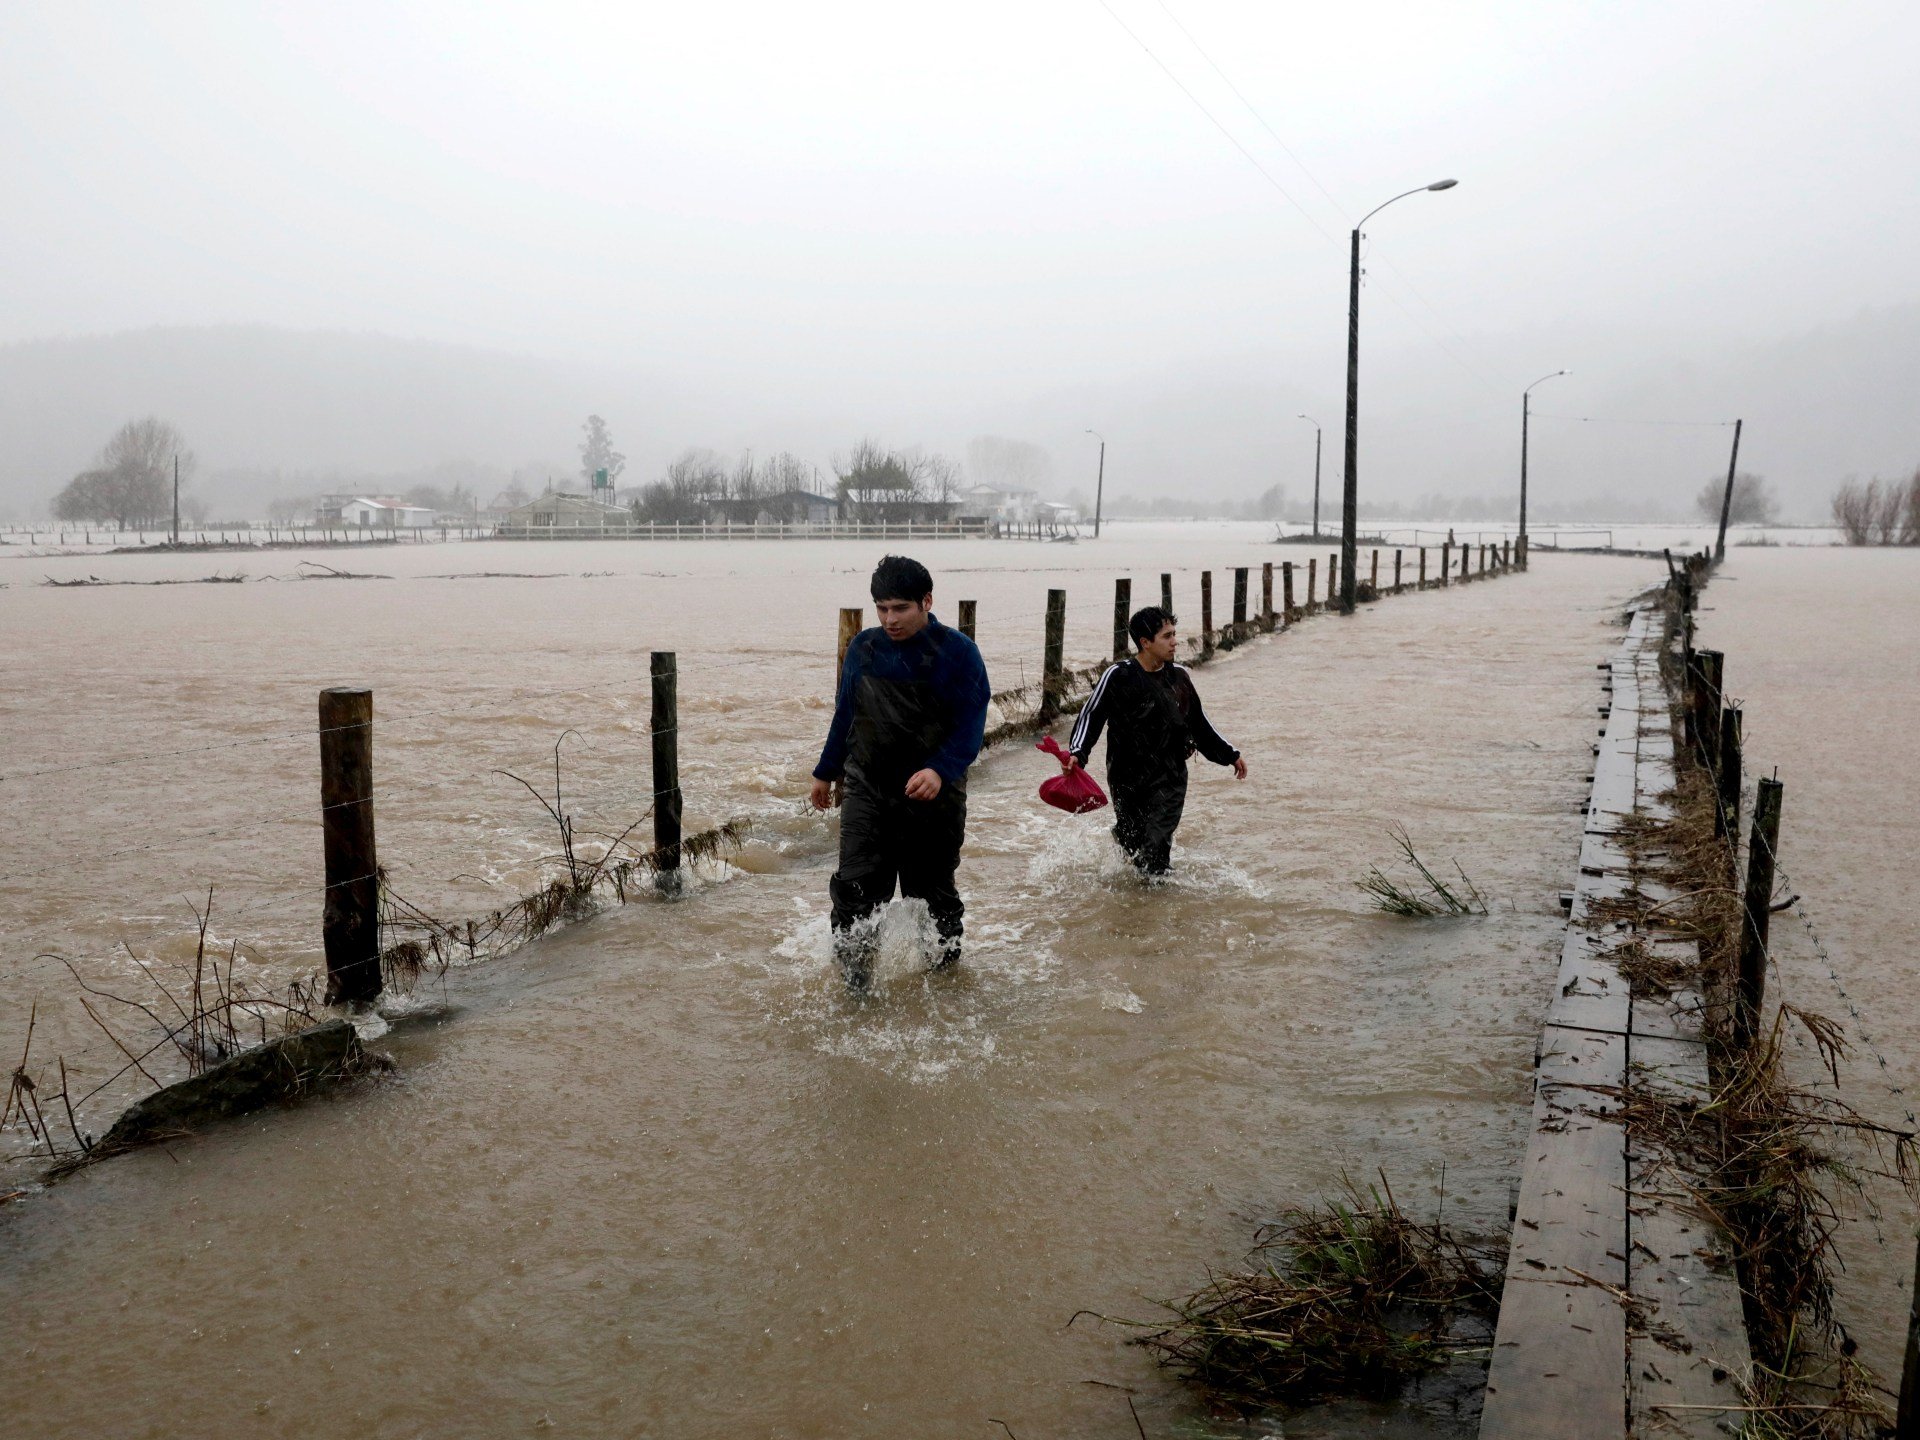 Photos: State of ‘catastrophe’ as downpours hit Chile